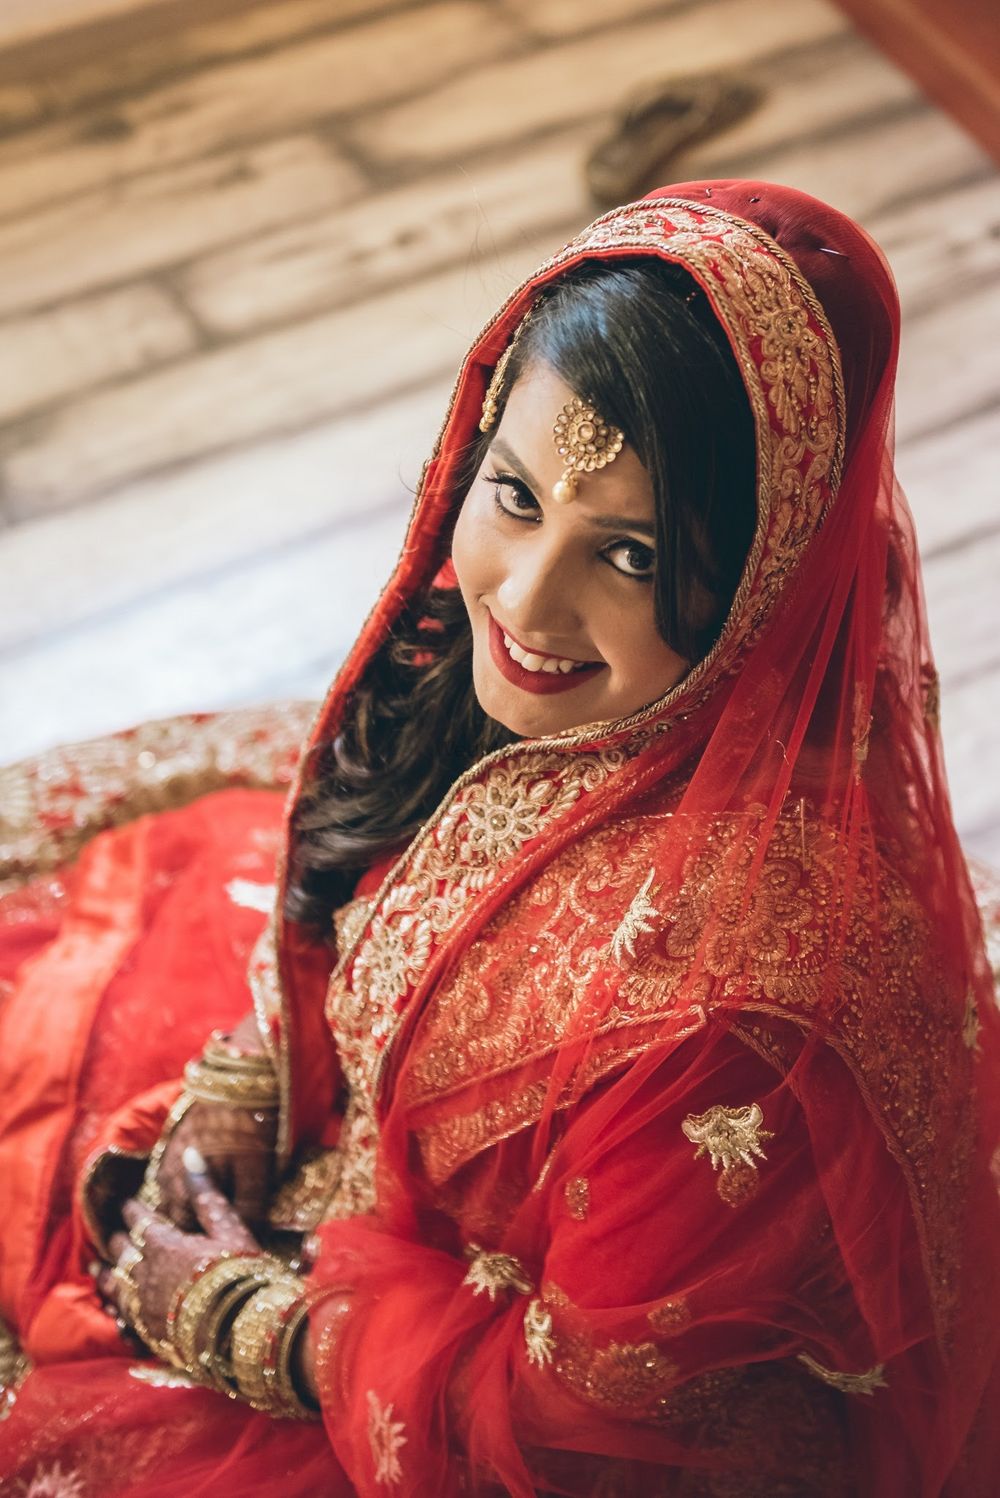 Photo From Nishaat + Nayyel - By Manan Photography